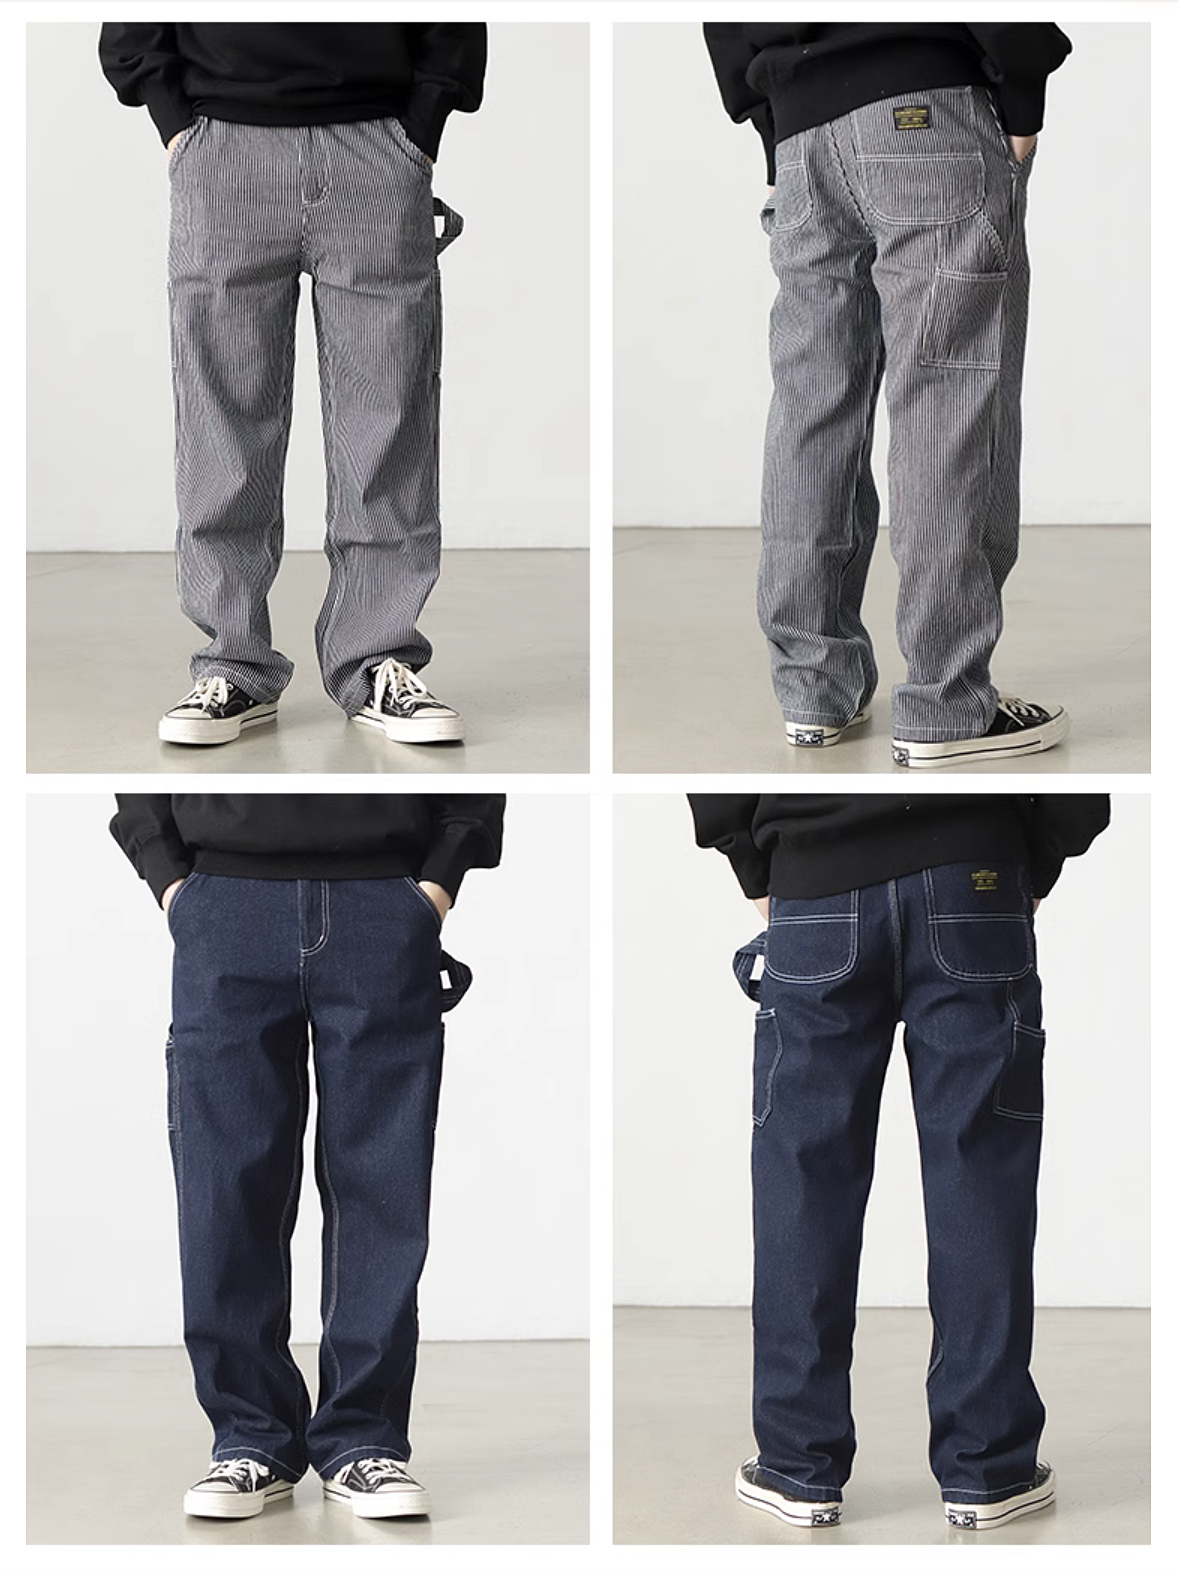 638 Loose Fit Workwear Trousers